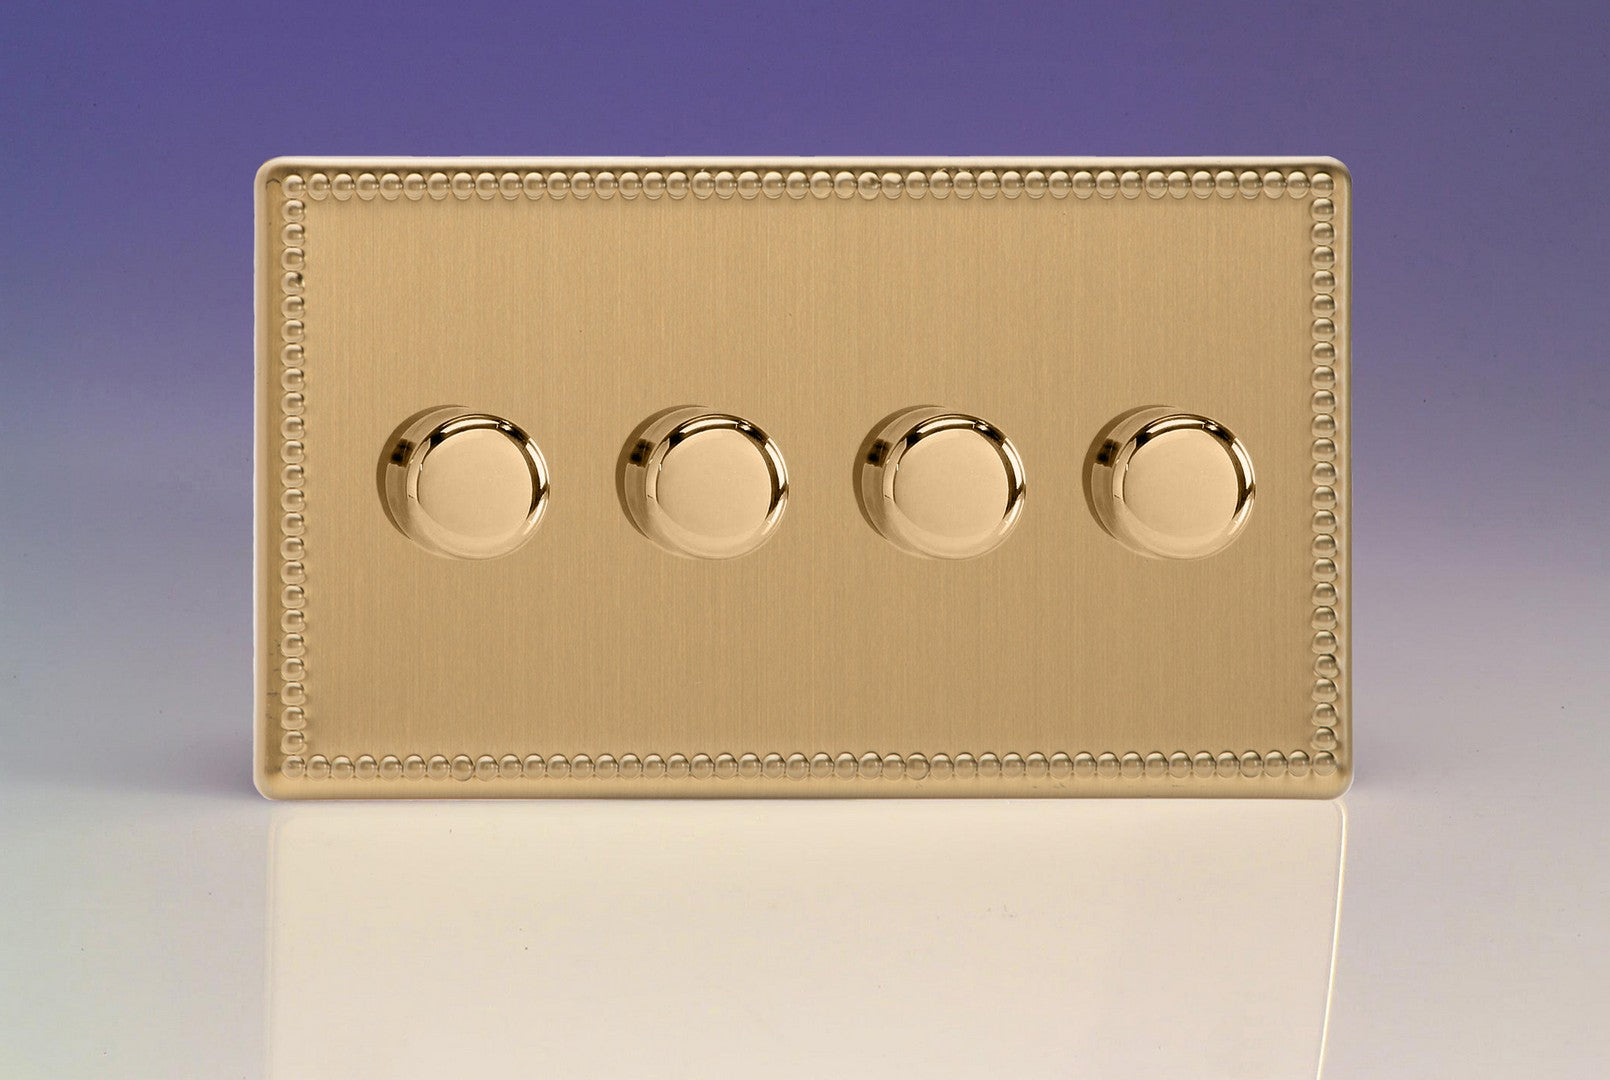 Varilight HDY44S.JB Jubilee Brushed Brass 4-Gang 2-Way Push-On/Off Rotary Dimmer 4 x 40-250W (Twin Plate)